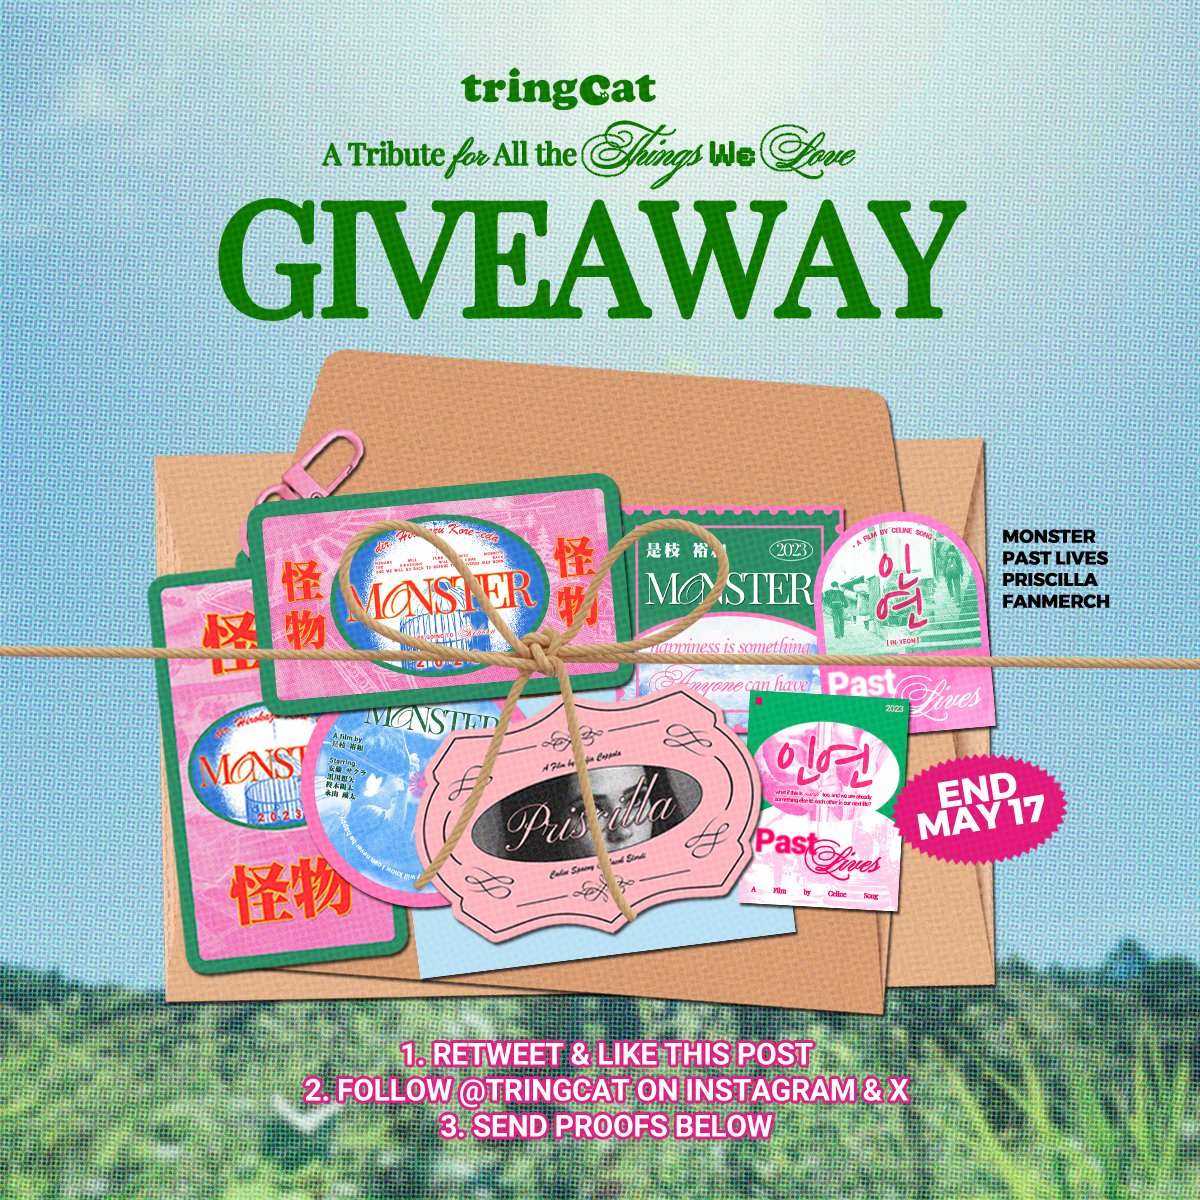 GIVEAWAY ALERT 🎬

the winner will receive monster, past lives, and priscilla fanmerch [keychain + stickers]

how to join:
- rt & like this post
- follow @tringcat on instagram & x (twt)
- send proofs below

end on may 17 @ 3 pm
🇮🇩 only

good luck 💚💫